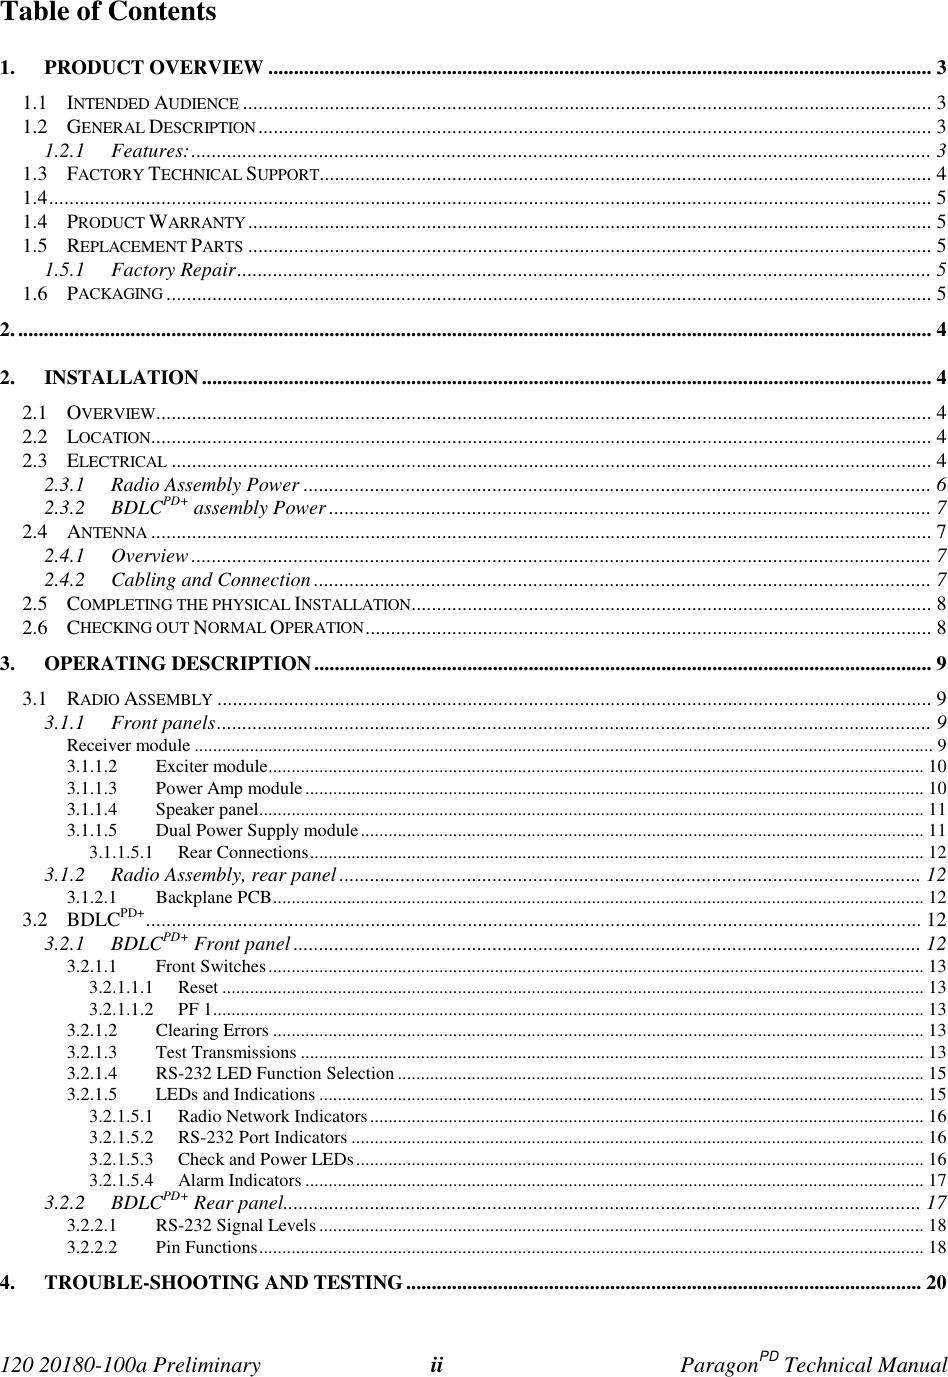 Page 2 of CalAmp Wireless Networks BDD4T85-1 Paragon/PD User Manual Parg PD  T100a Prelim